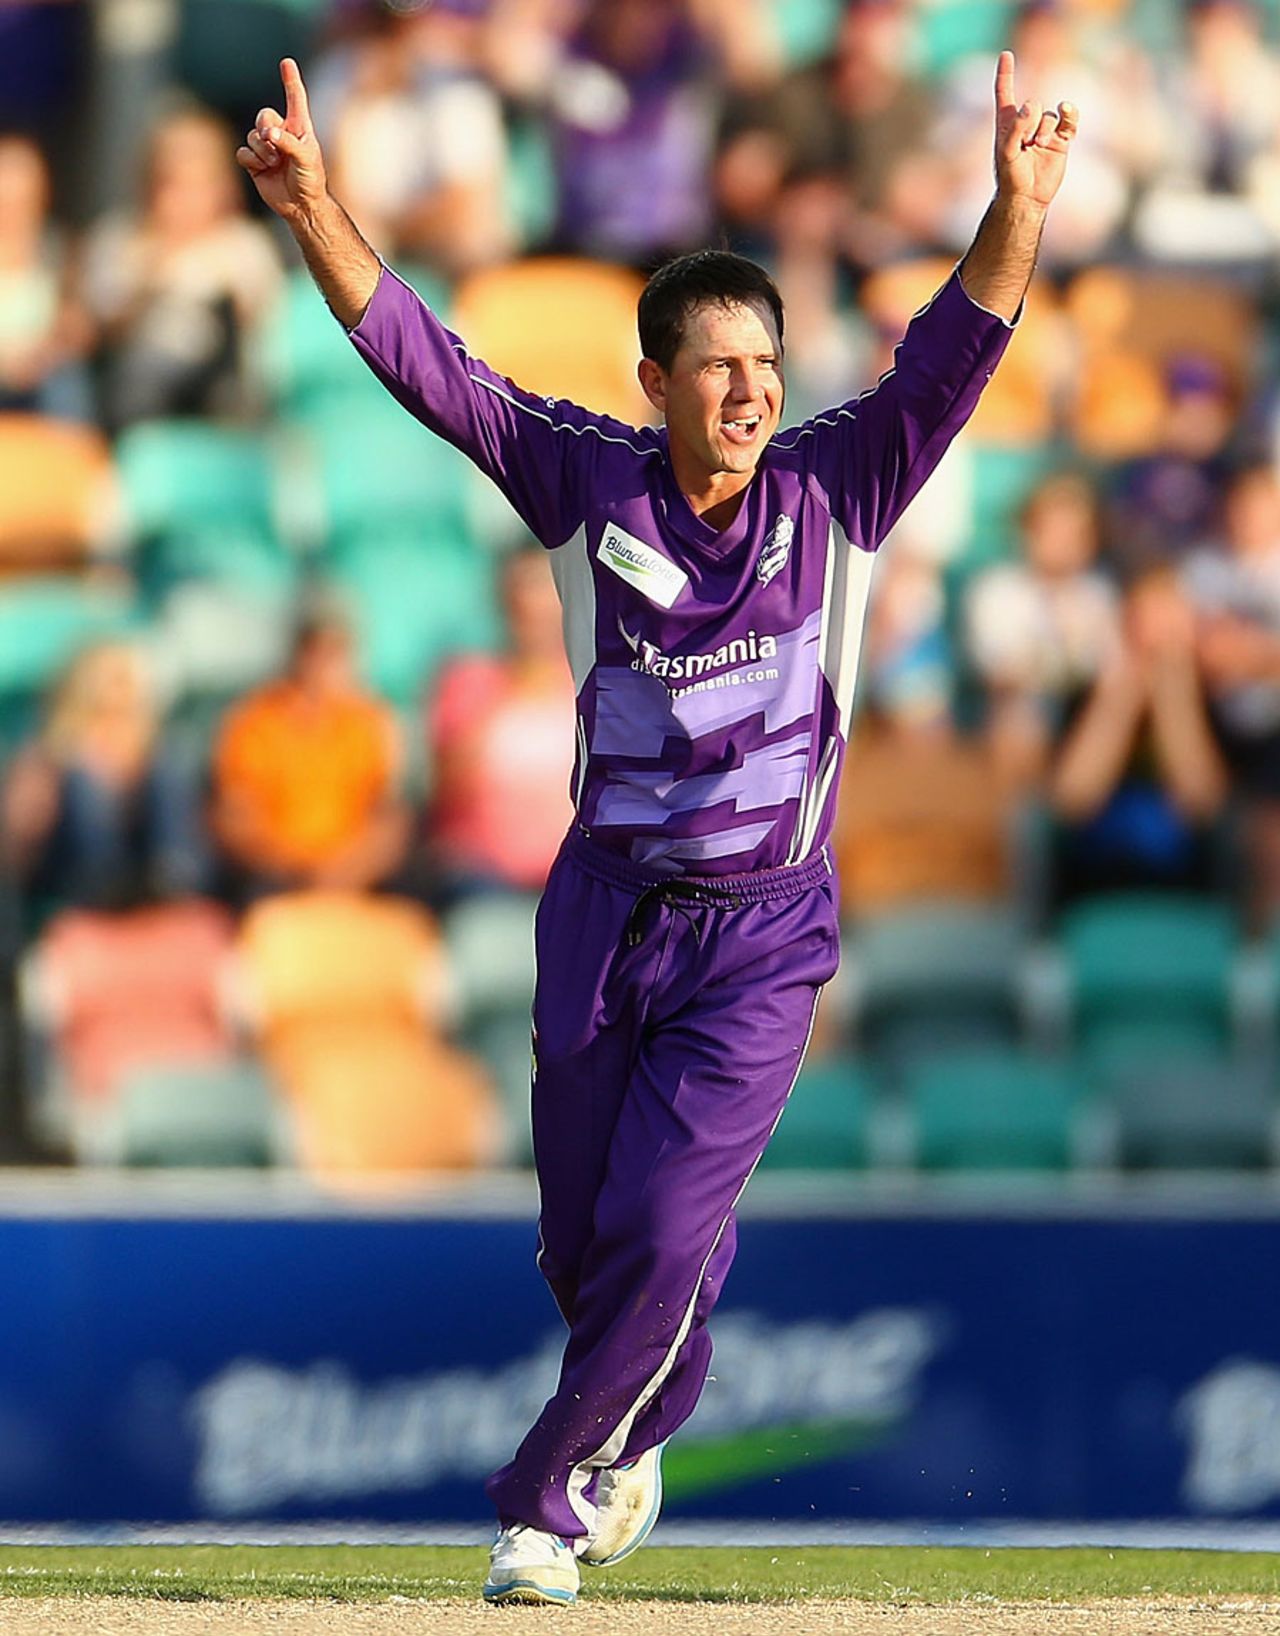 Ricky Ponting claimed a wicket in the one over that he bowled, Hobart Hurricanes v Sydney Thunder, Big Bash League, Hobart, December 23, 2012